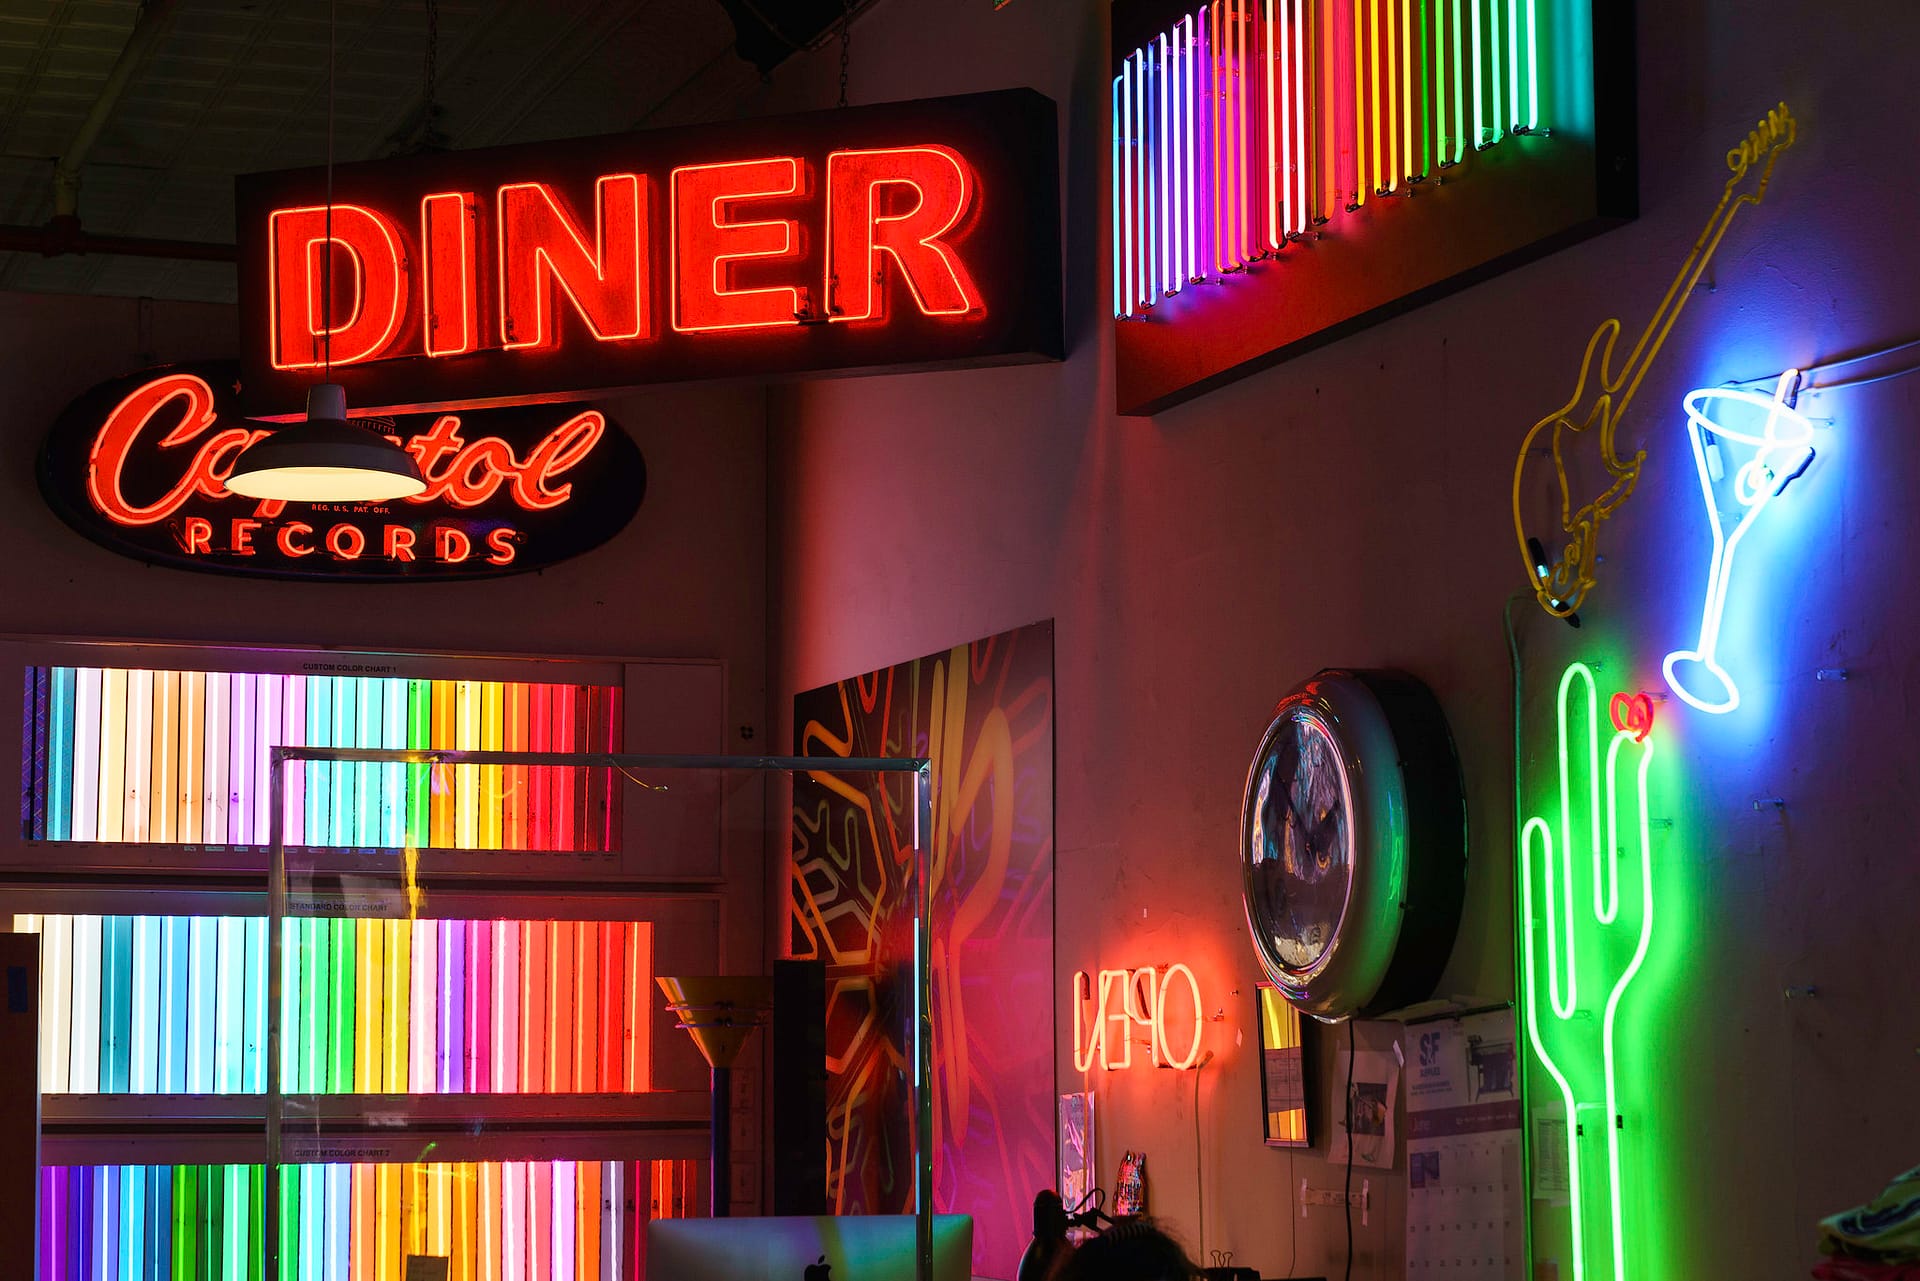 The New York Neon Shop That Became Legendary